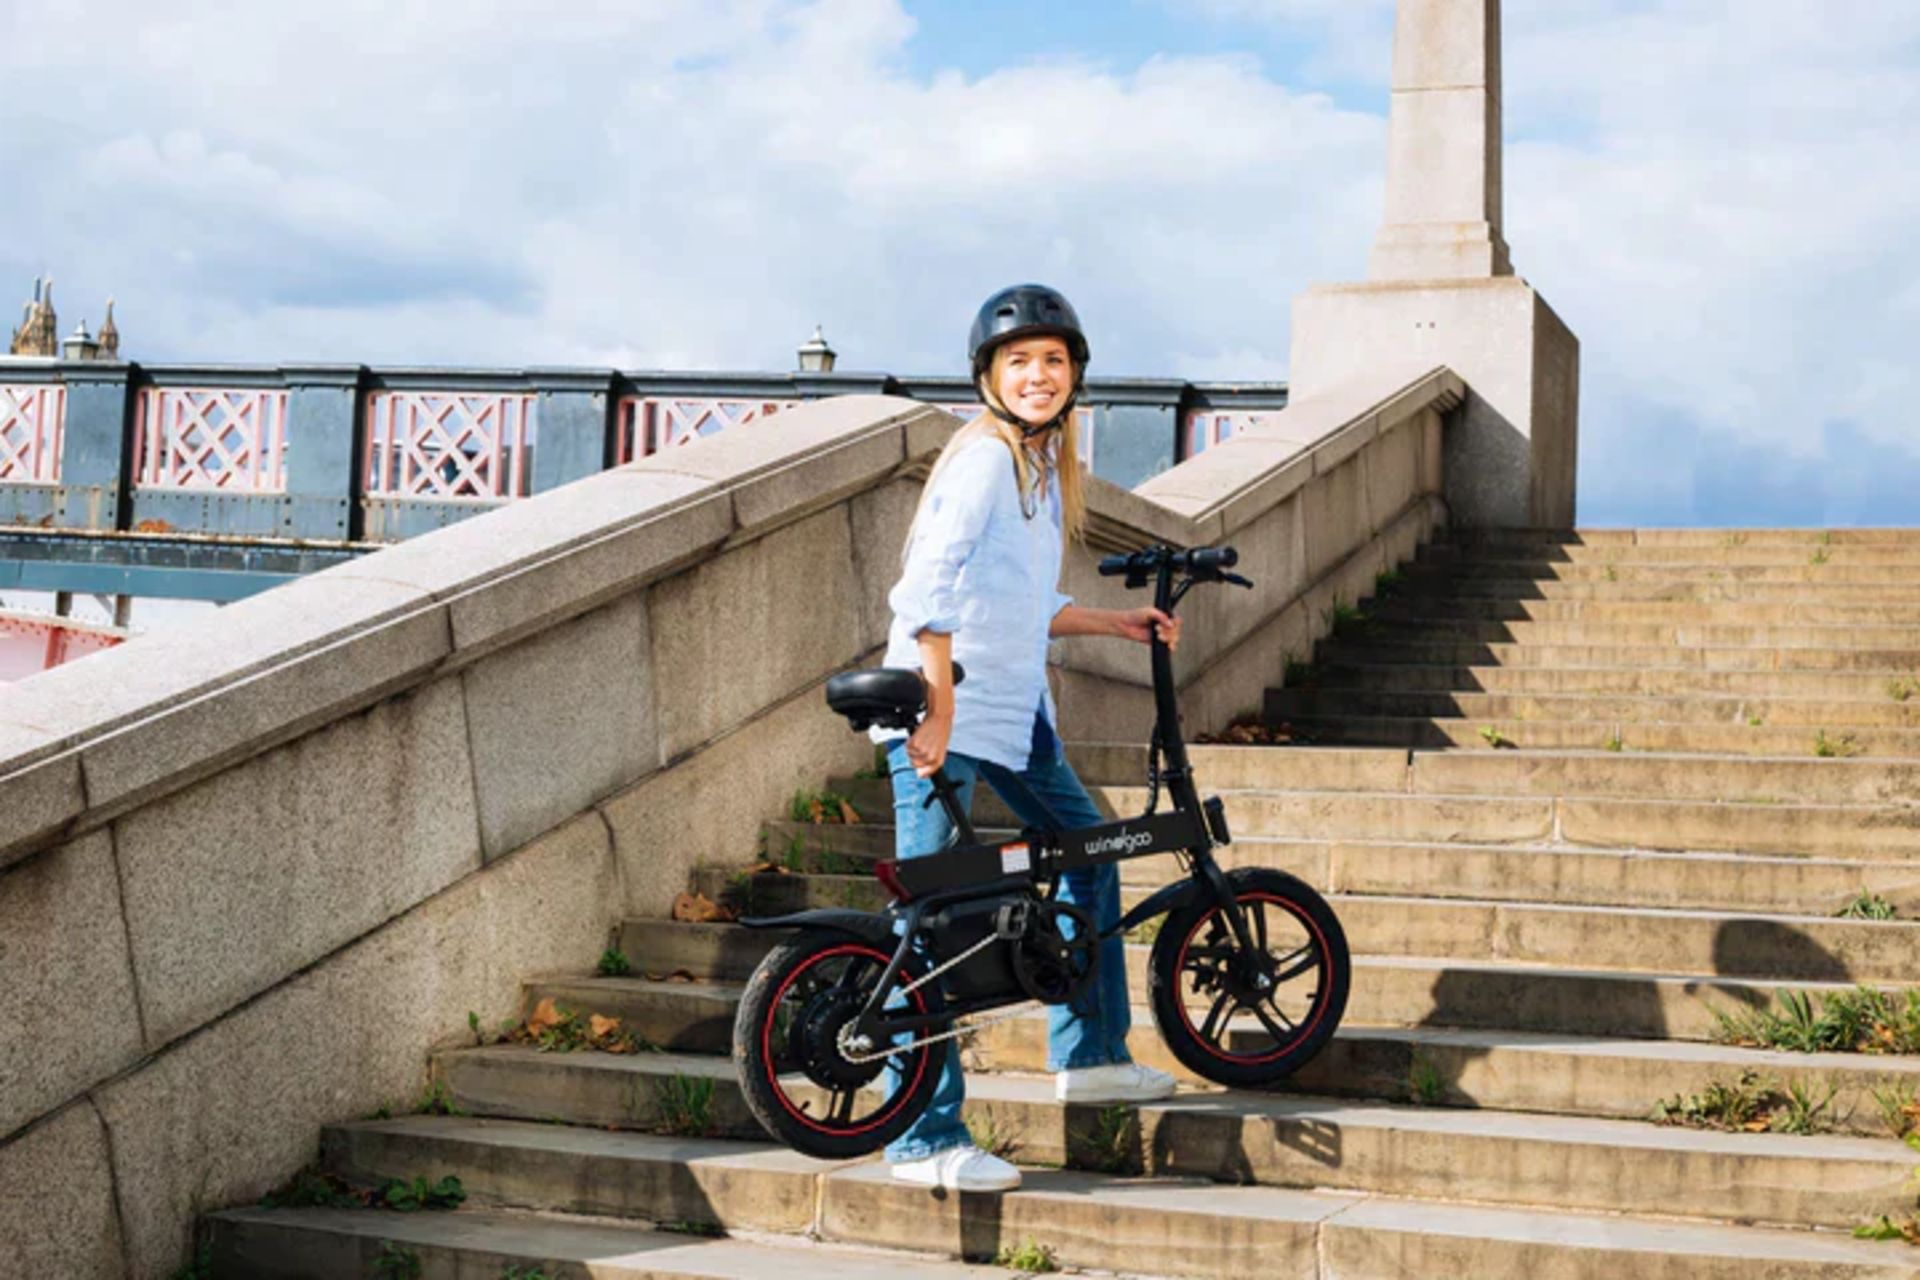 5 X Windgoo B20 Pro Electric Bike. RRP £1,100.99. With 16-inch-wide tires and a frame of upgraded - Bild 3 aus 7